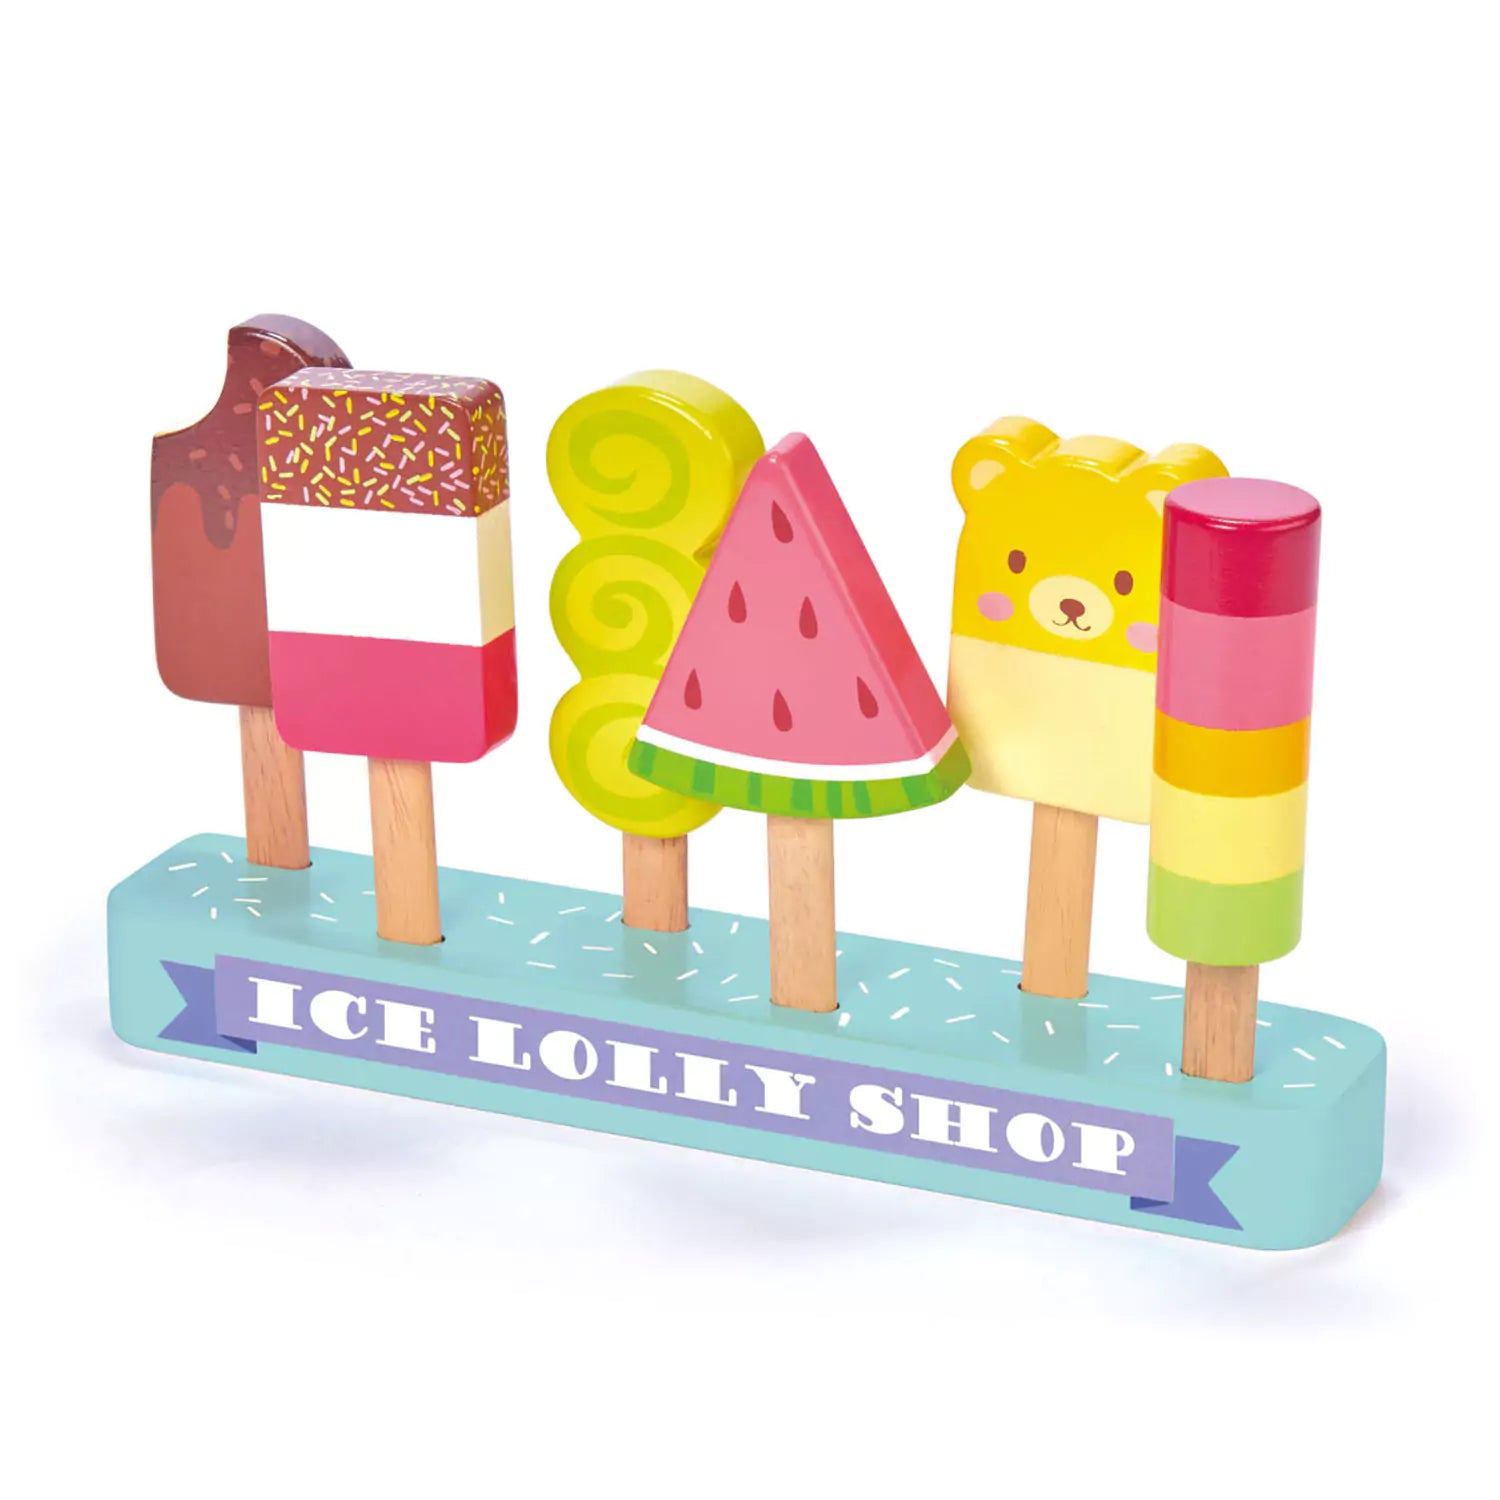 An image of Wooden Toys - Kids Pretend Play - Pretend Ice Lolly Shop | Tender Leaf